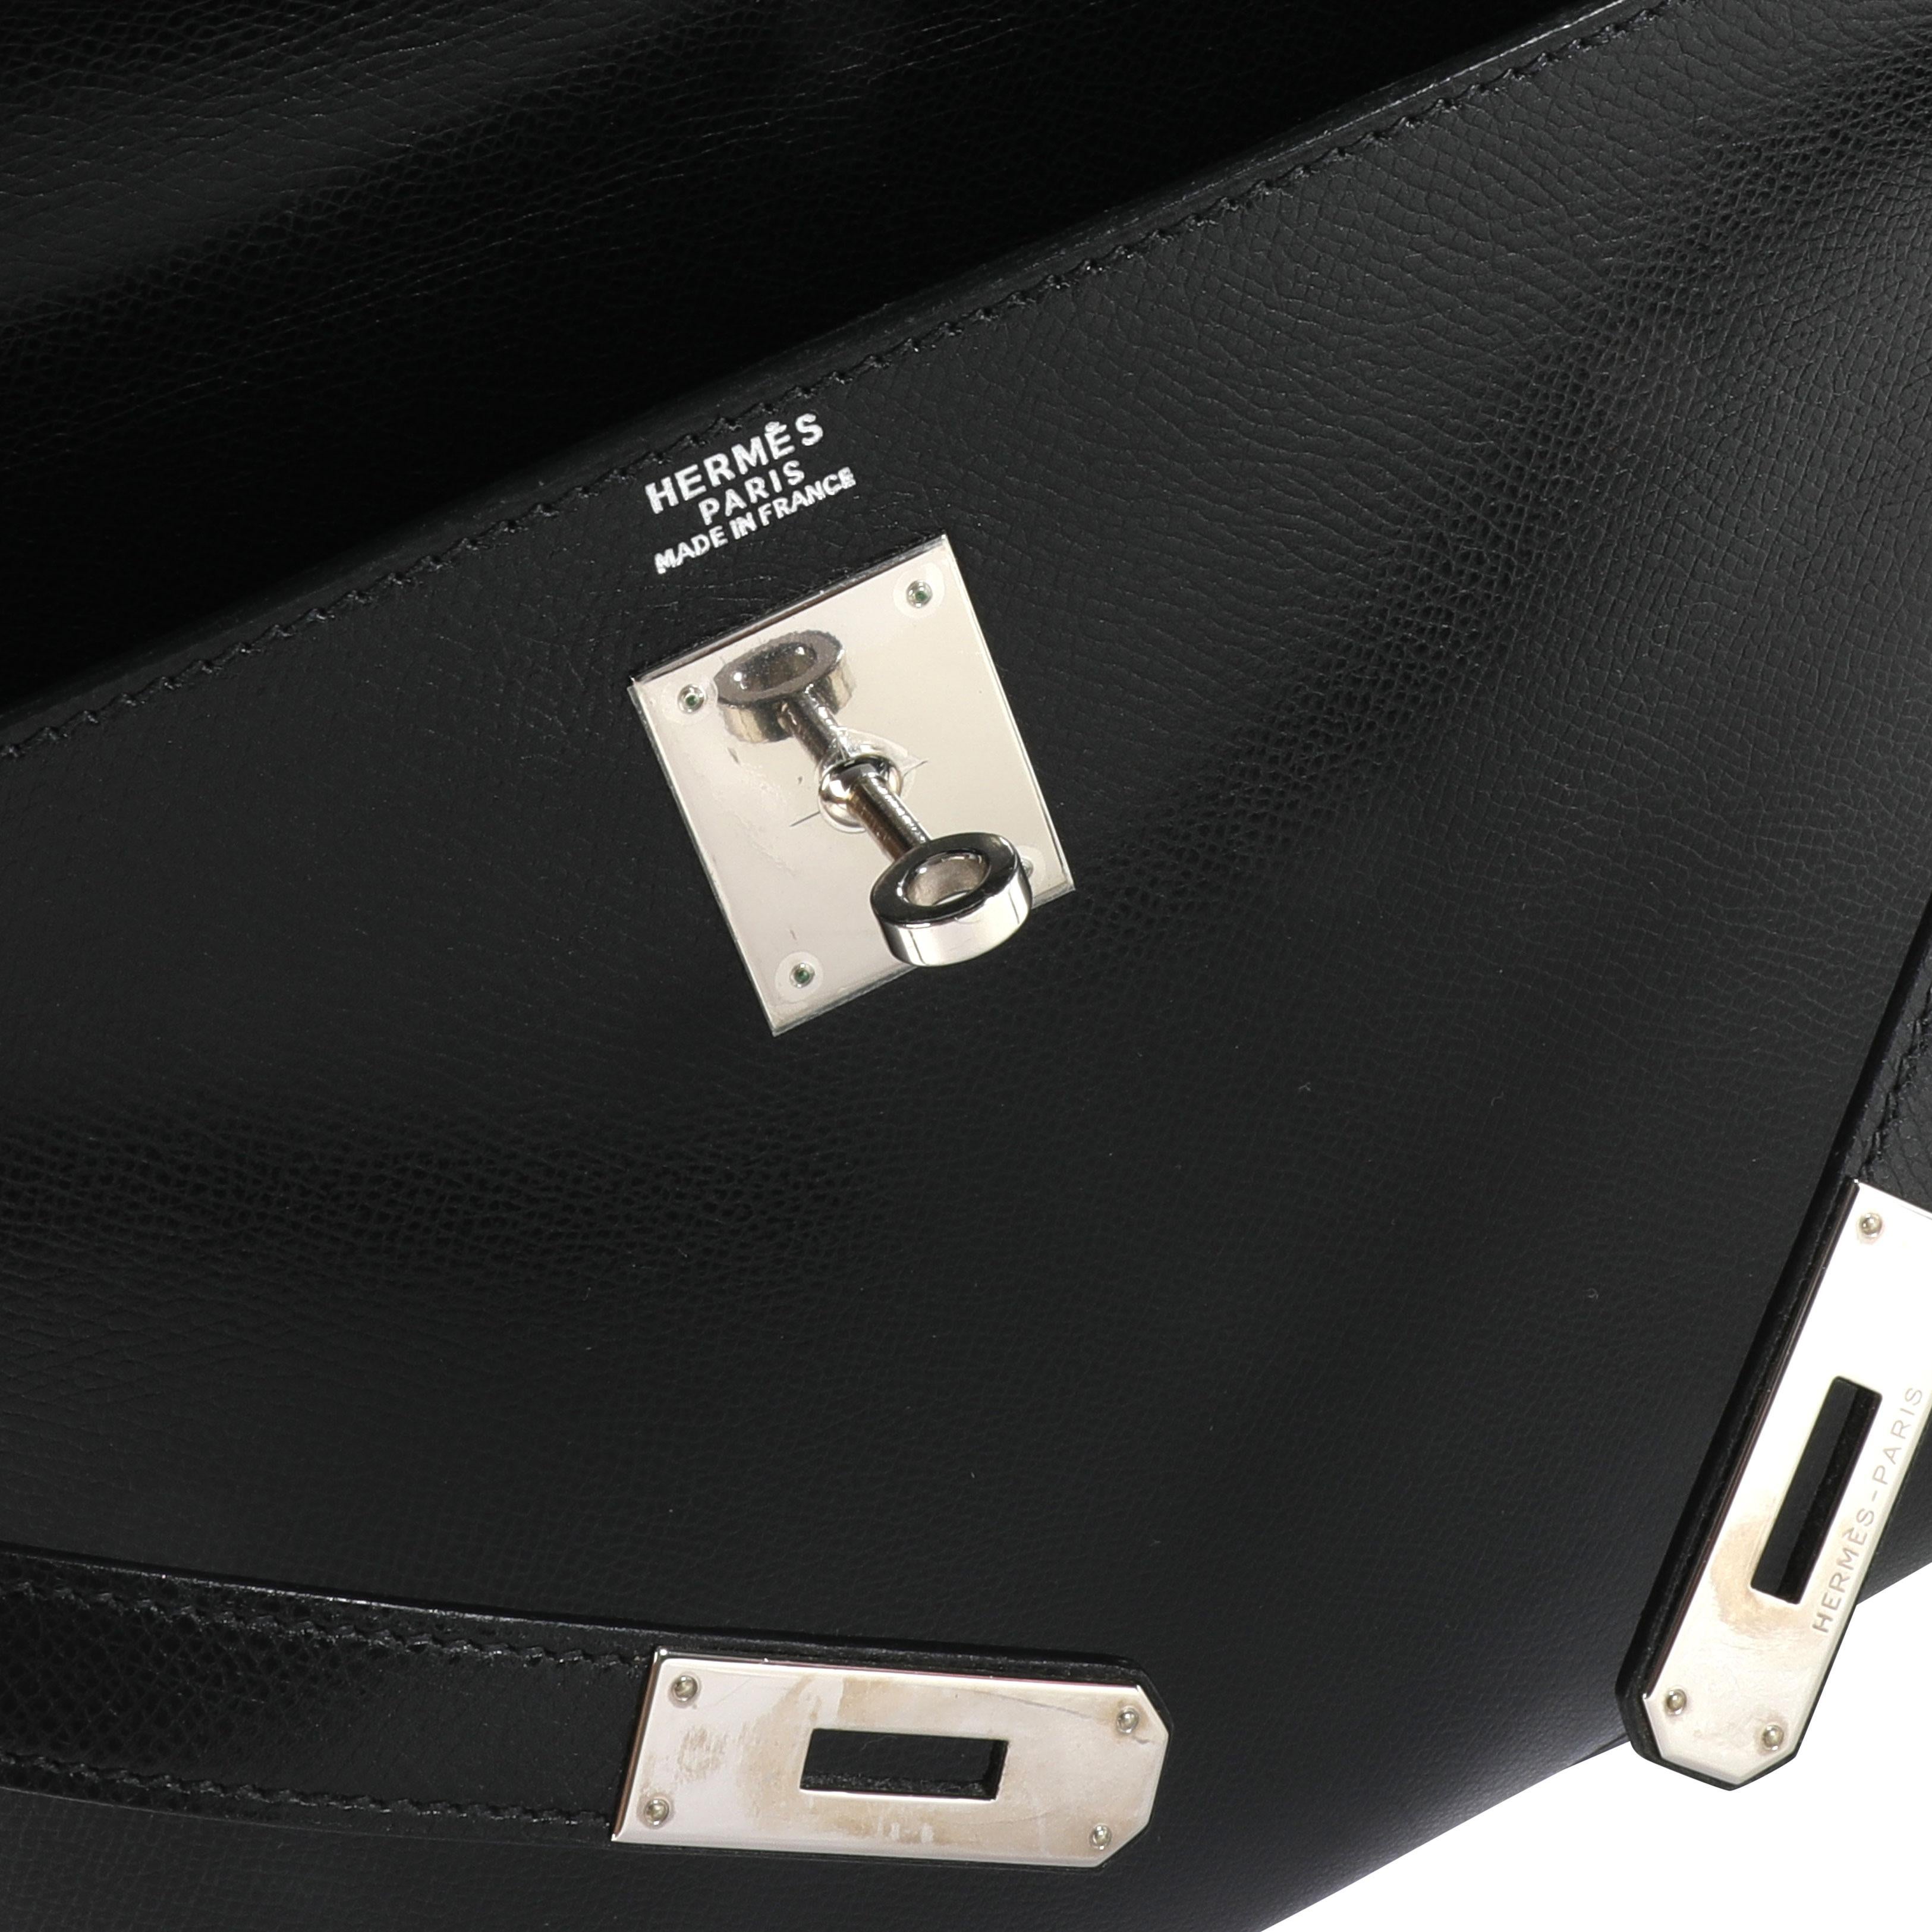 Hermès Black Epsom Sellier Kelly 32 PHW
SKU: 111214

Handbag Condition: Very Good
Condition Comments: Very Good Condition. Light scuffing throughout leather. Scratching and tarnishing to hardware.
Brand: Hermès
Model: Kelly

Origin Country: